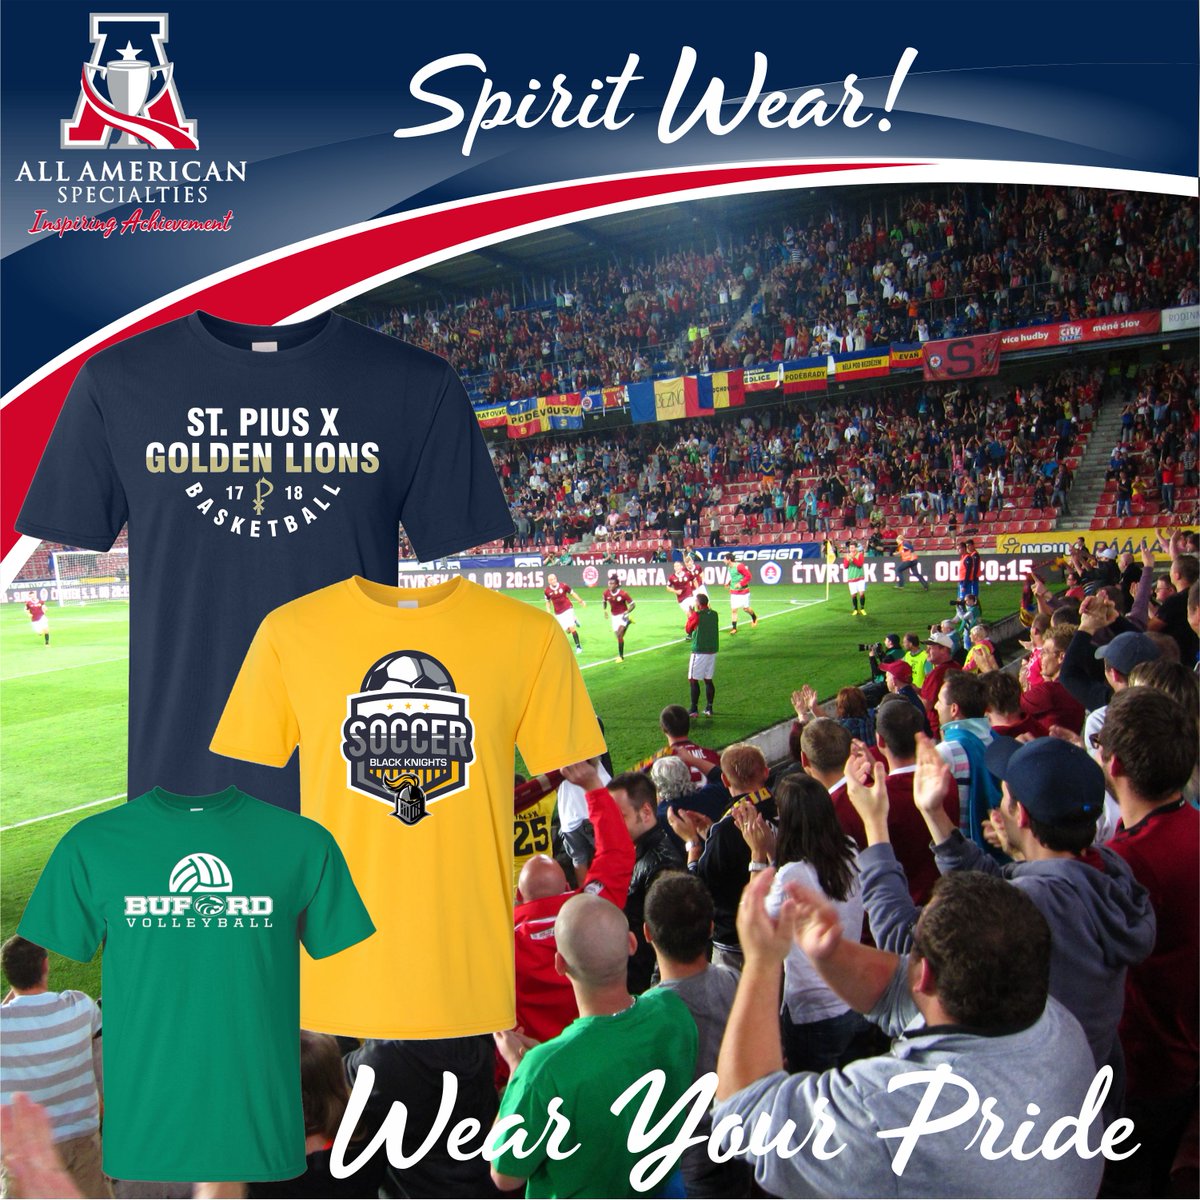 “If you love the game, nobody can take that from you.” – @MJ_Quotes 
📣 WEAR YOUR PRIDE 📣
#InspireAchievement #Fans #SuperFans #SportsClothing #SportWear #SpiritWear #LogoShirts #Pride #Cheer #YourTeam #MyTeam #GoTeam #PlayHard #Football #GameDay #CustomShirt #Crowd #GAsports